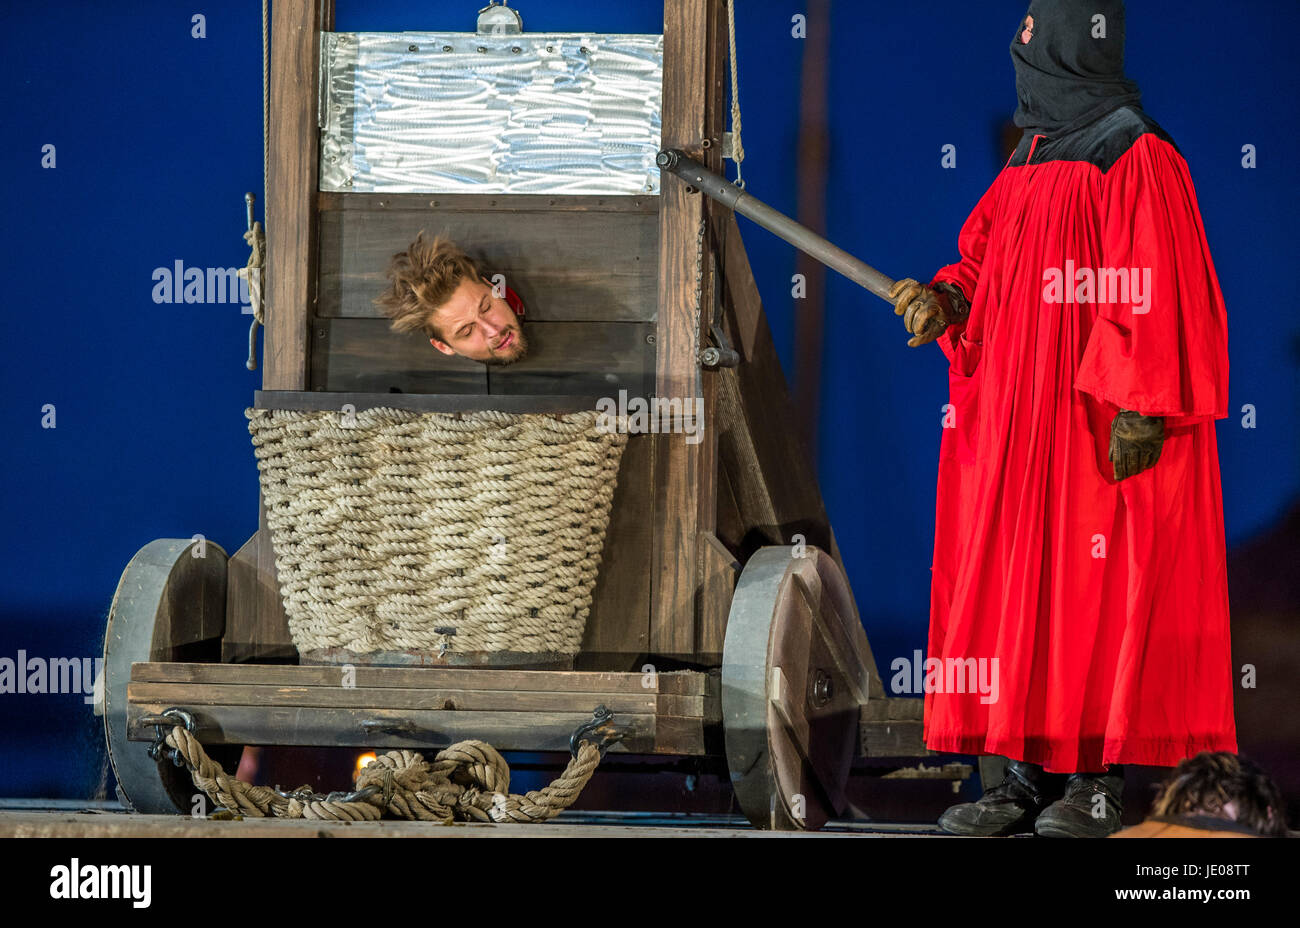 Bastian Semm as the pirate Klaus Stoertebeker can be seen during a press viewing of the Stoertebeker Festival on the natural stage Ralswiek on the island Ruegen, Germany, 21 June 2017. With Stoertebeker's death the five-part cycle will end. This years performance with the titel 'In the shadow of death' will premiere on the 24th of June 2017. The Stoertebeker Festival has been taking place at the island Ruegen for 25 years now. Photo: Jens Büttner/dpa-Zentralbild/dpa Stock Photo